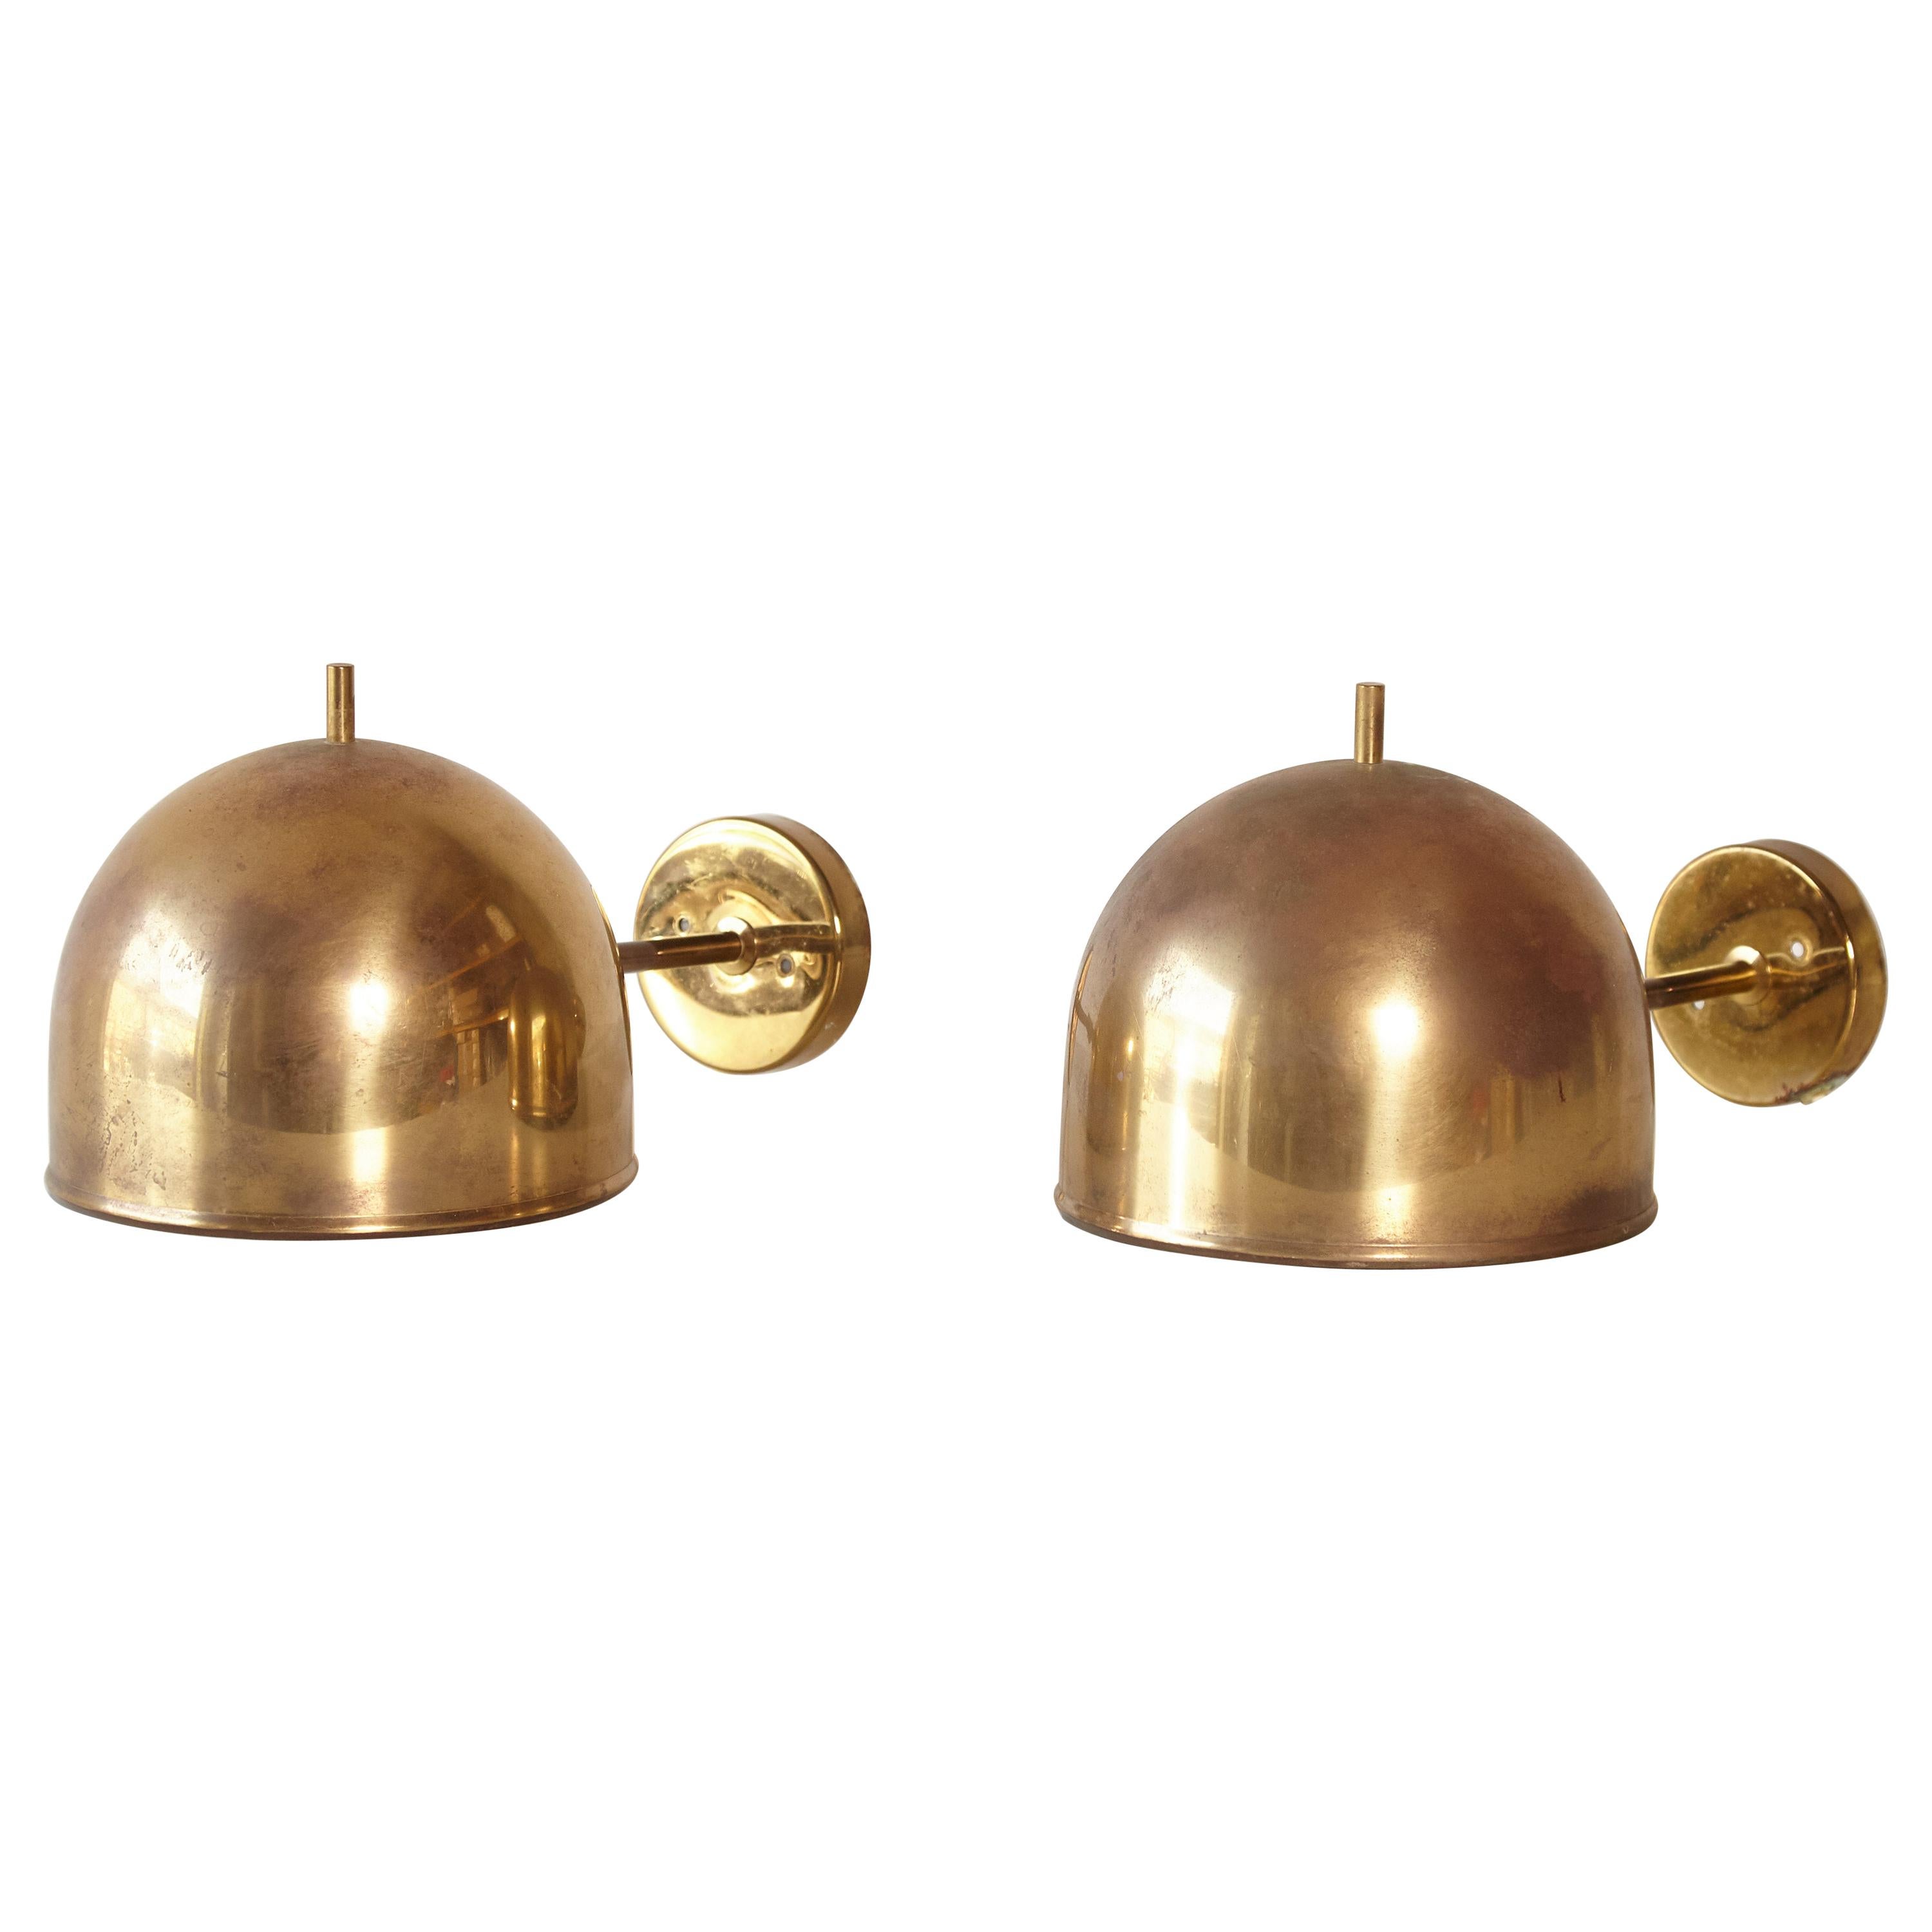 Patinated Pair of Brass Wall Lamps, Model G-075, Bergboms, Sweden, 1960s